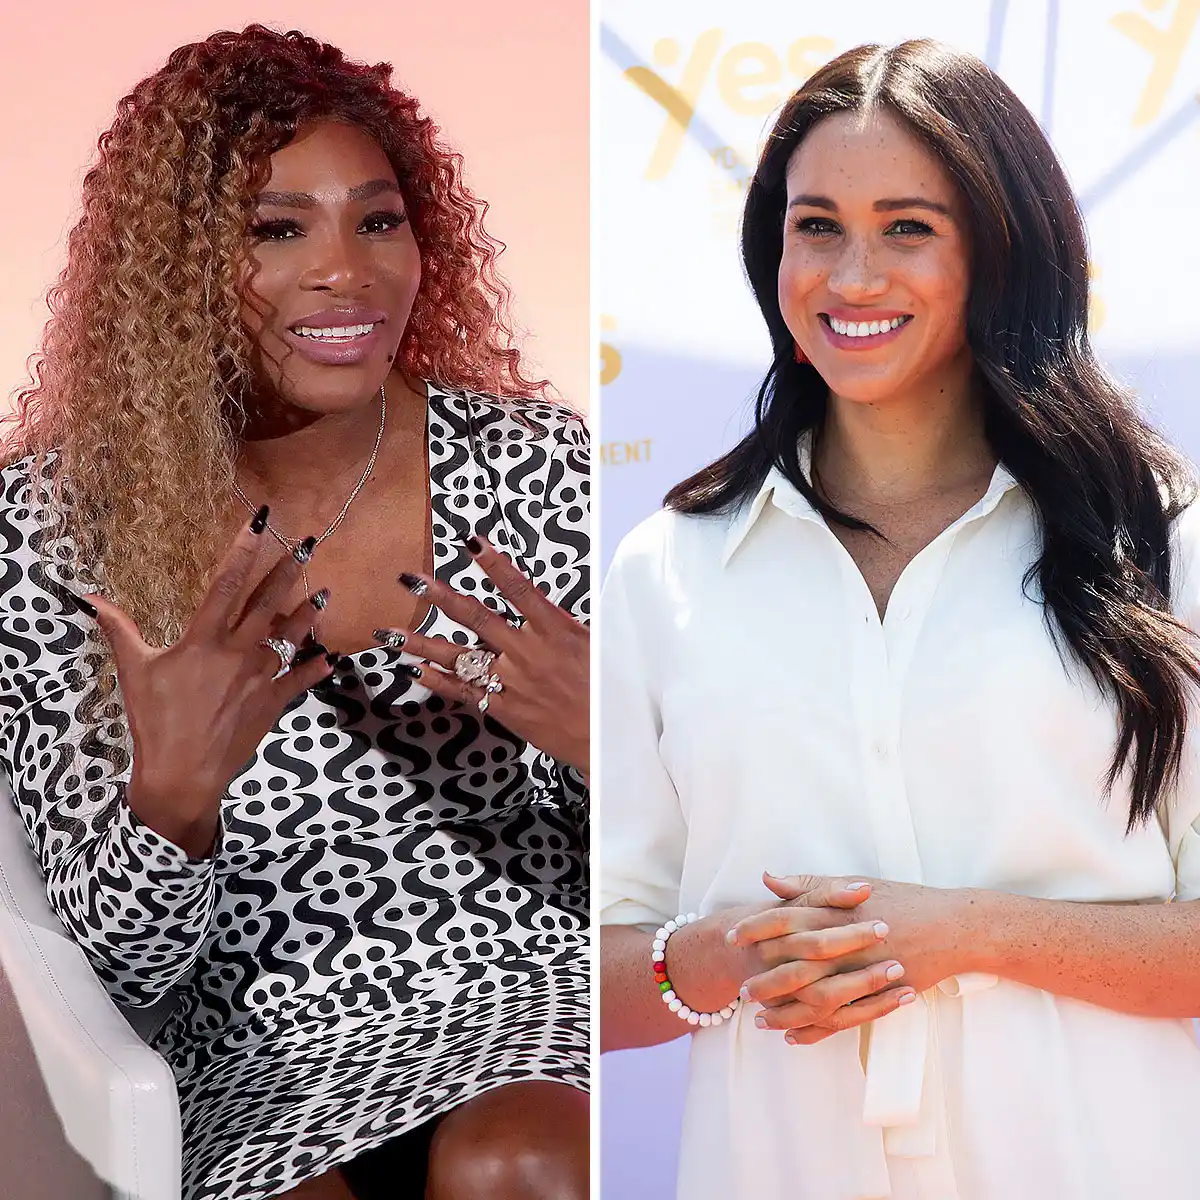 Meghan Markle and Serena Williams' sweetest quotes about their friendship